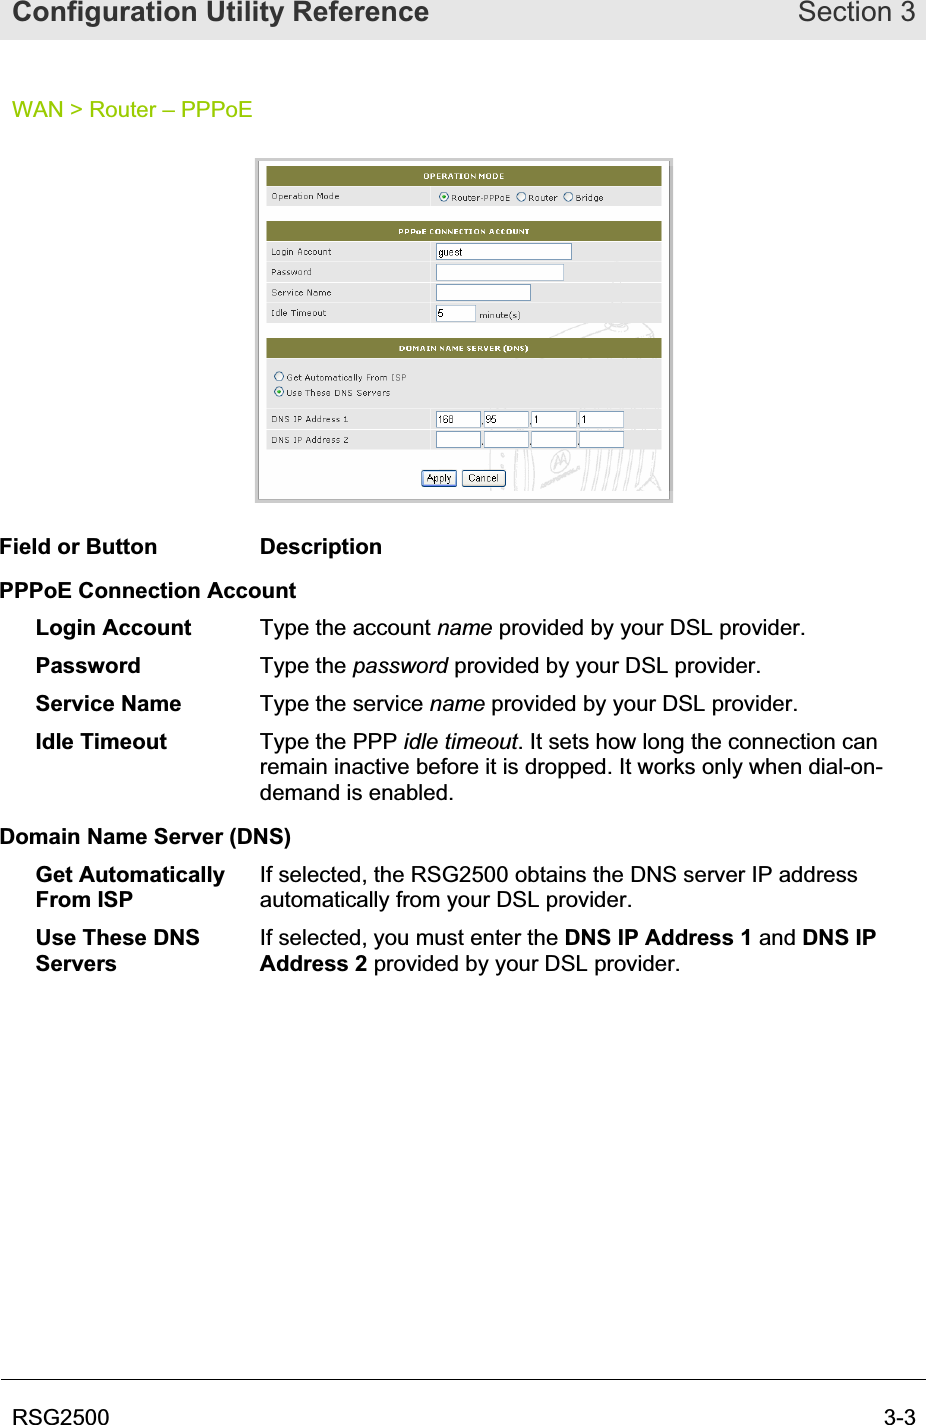 Configuration Utility Reference Section 3RSG2500  3-3WAN &gt; Router – PPPoE Field or Button  Description PPPoE Connection Account Login Account  Type the account name provided by your DSL provider. Password  Type the password provided by your DSL provider. Service Name  Type the service name provided by your DSL provider. Idle Timeout  Type the PPP idle timeout. It sets how long the connection can remain inactive before it is dropped. It works only when dial-on-demand is enabled. Domain Name Server (DNS) Get Automatically From ISP If selected, the RSG2500 obtains the DNS server IP address automatically from your DSL provider. Use These DNS ServersIf selected, you must enter the DNS IP Address 1 and DNS IP Address 2 provided by your DSL provider. 